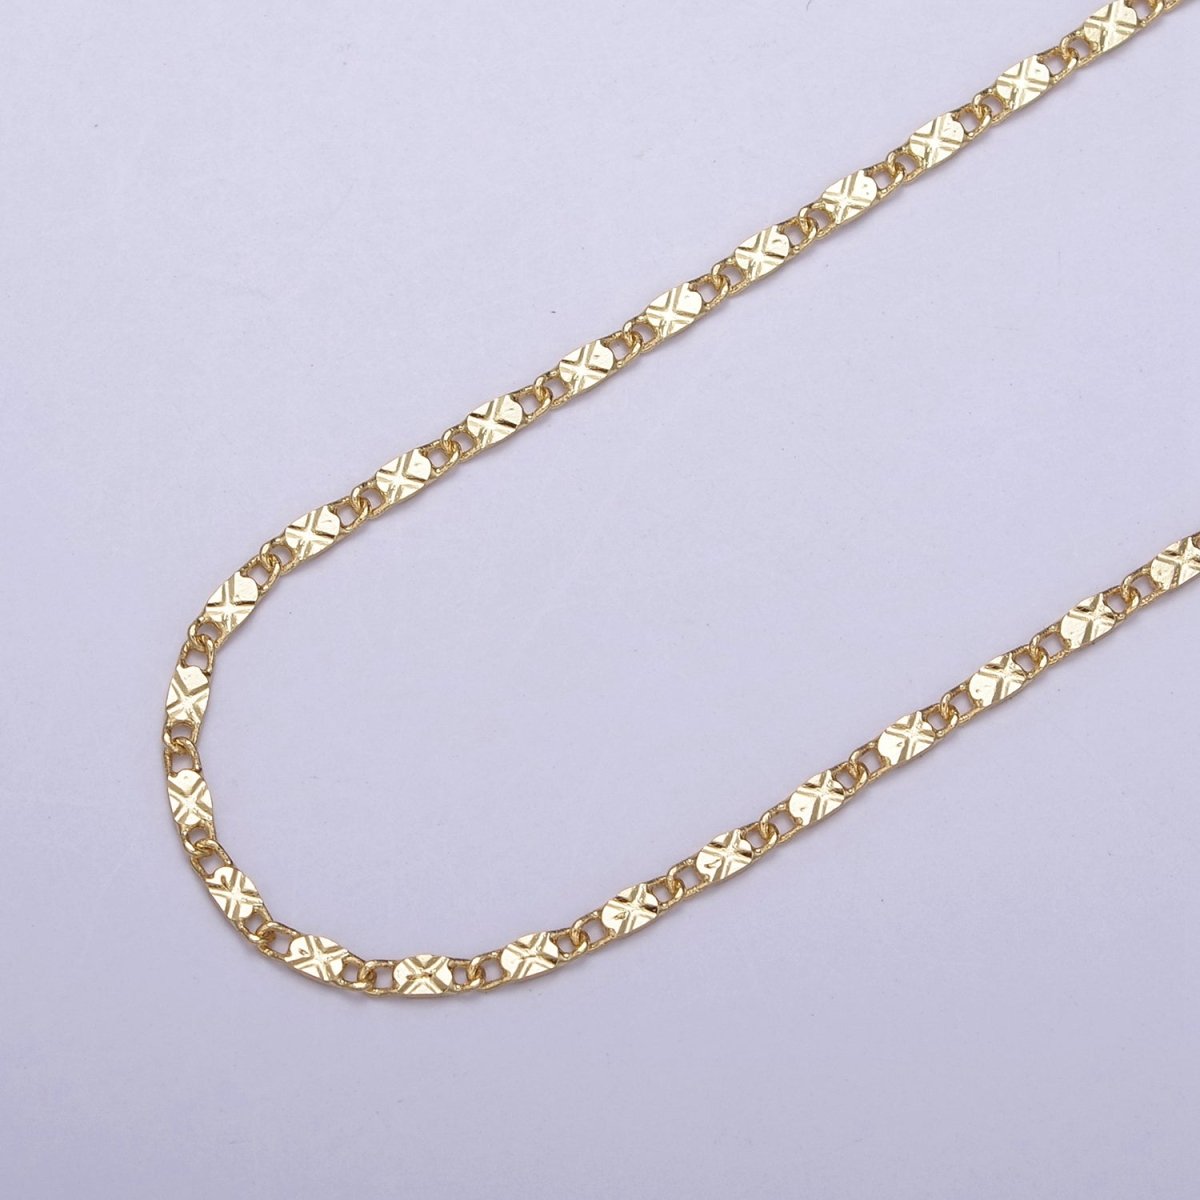 Wholesale Gold Chain Necklace, Fine Scroll Gold Chain, Simple Gold Necklace, Thin Plain Women's Necklace 18" 20" Women Chain | WA-682 WA-683 Clearance Pricing - DLUXCA